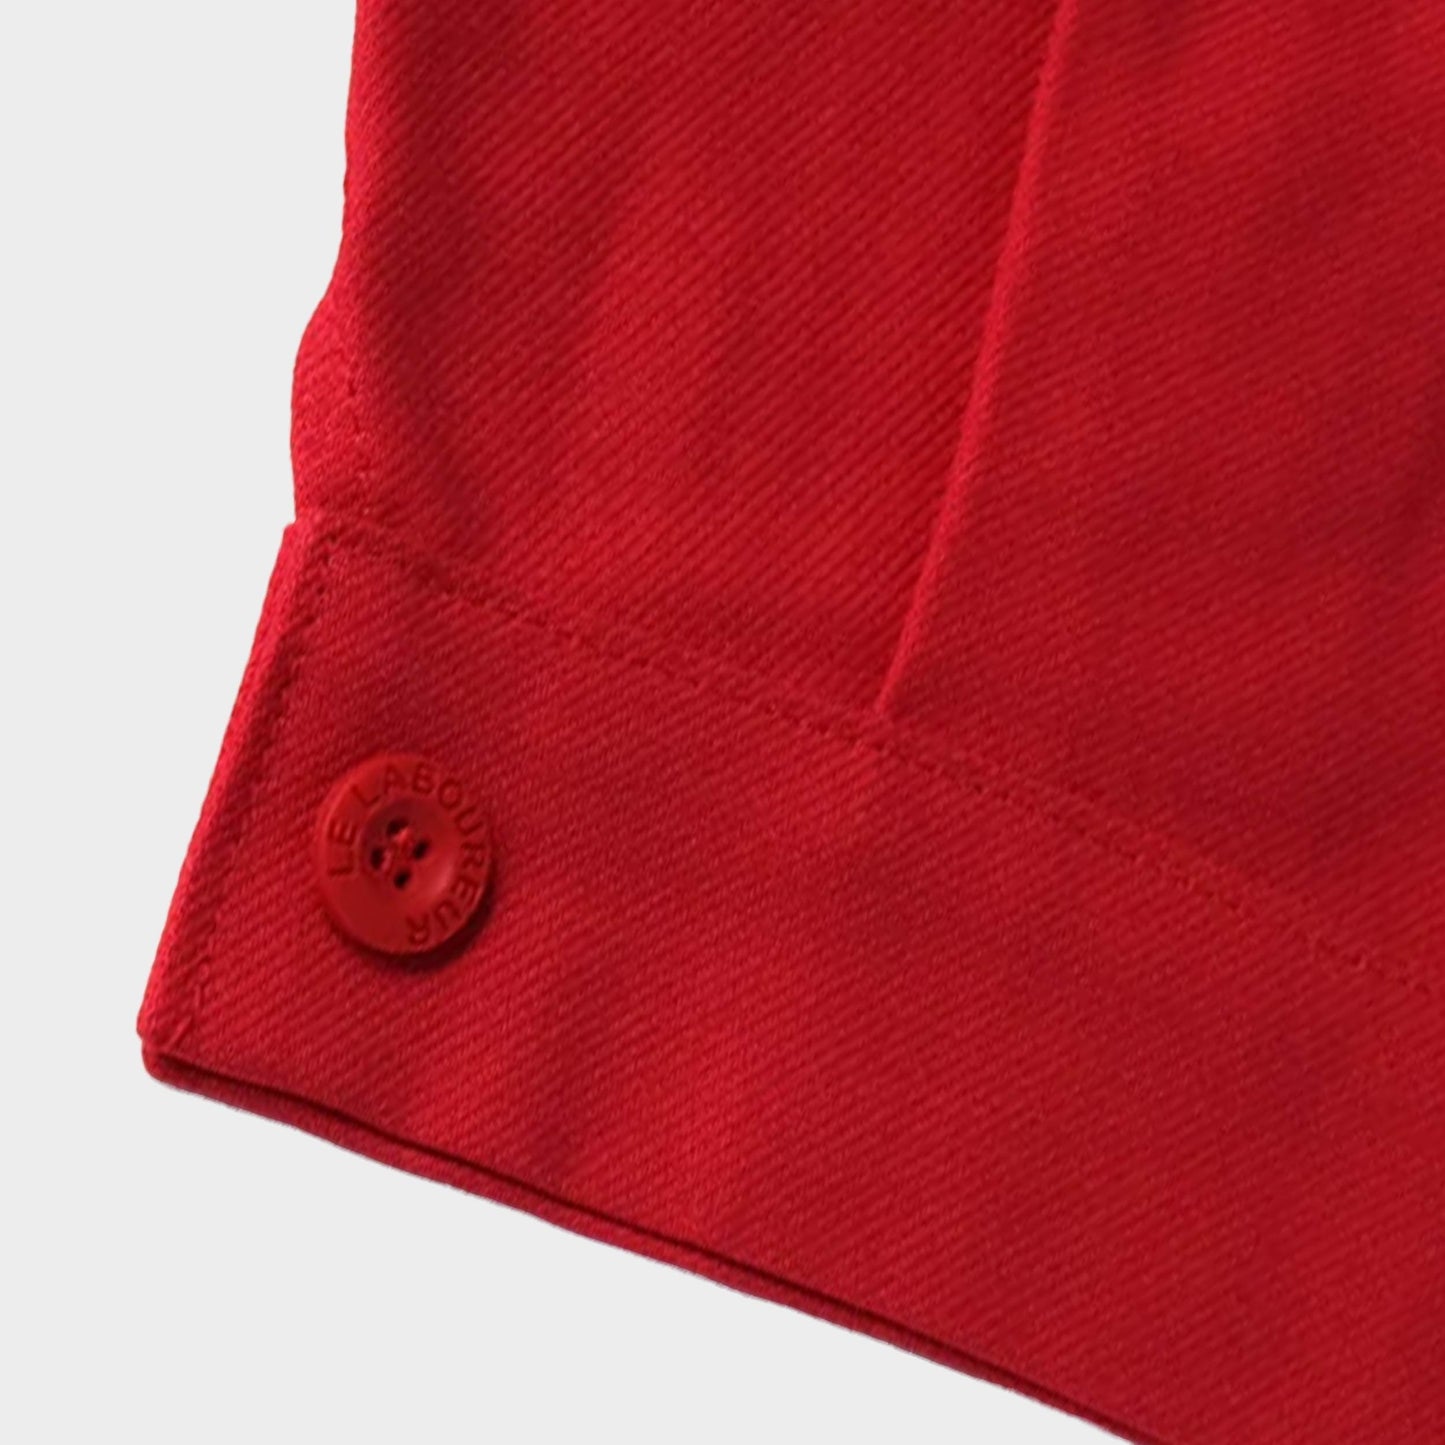 Le Laboureur French Cotton Work Jacket in Red